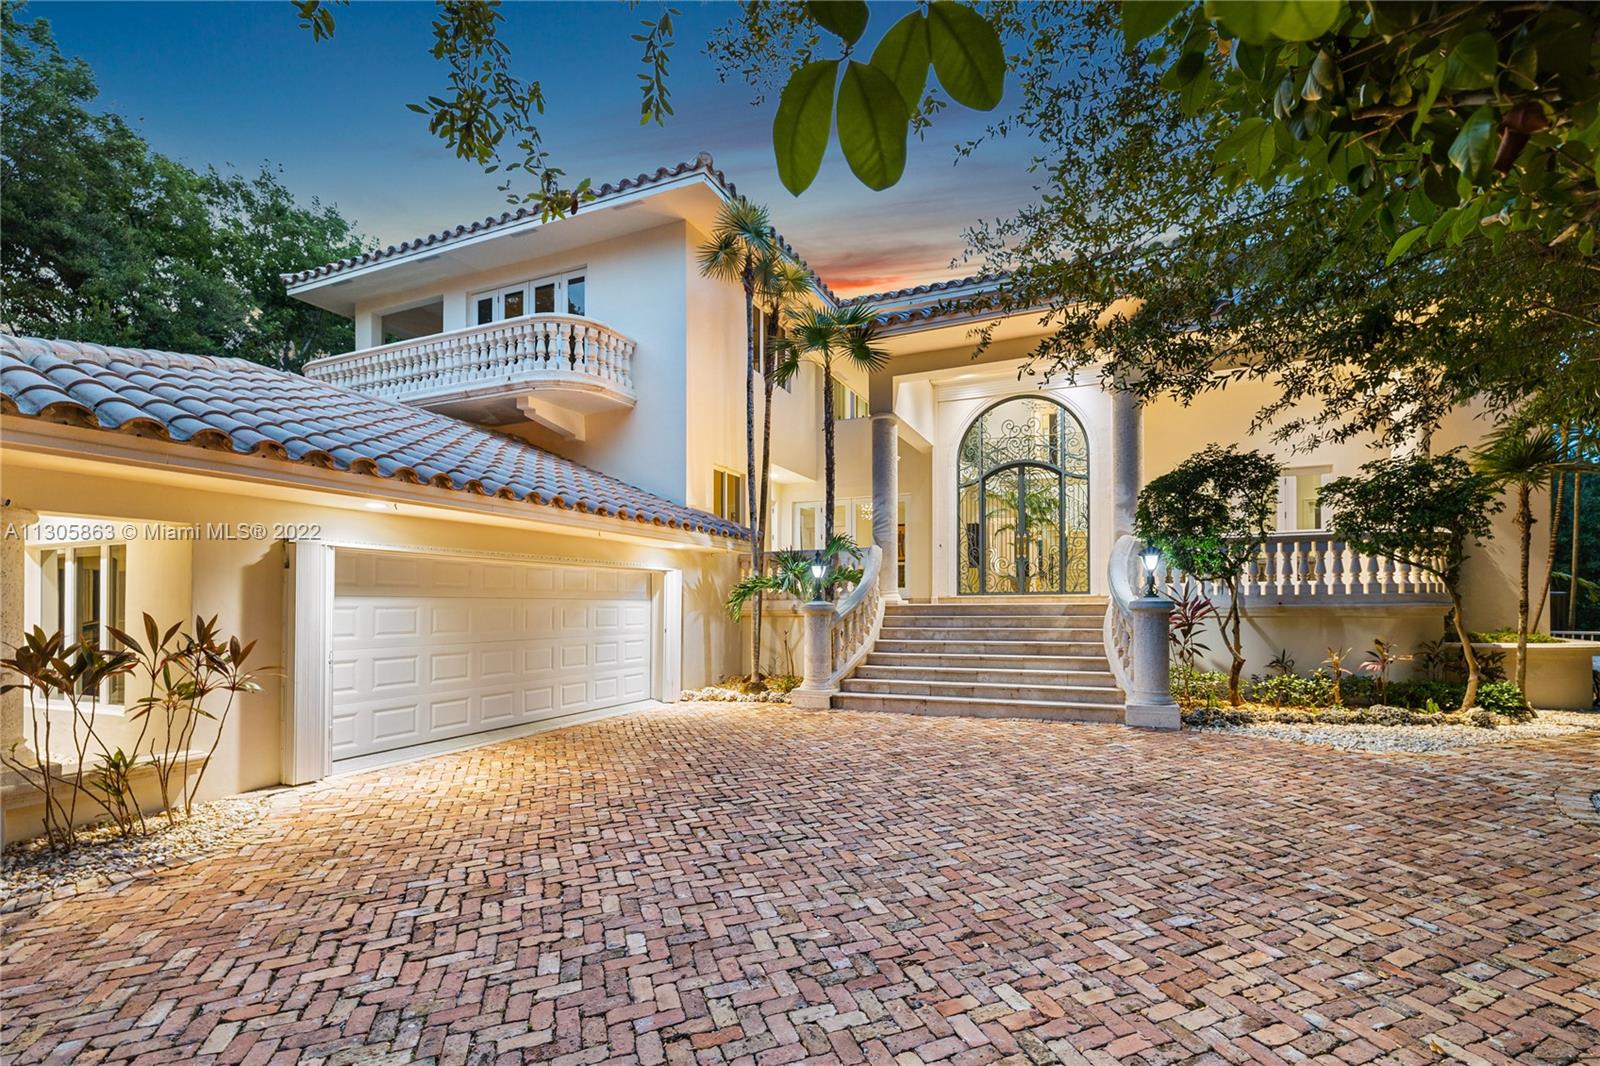 Stunning waterfront home in the exclusive gated community Islands of Cocoplum in Coral Gables. A double-height foyer greets you with a magnificent stairway. The large modern kitchen and dining room overlooks the beautiful pool area and an outside terrace with views to the dock & waterway. Located on a 14,018 SqFt lot at the end of a cul-de-sac, the home has 5 Bed 5/half bath a gorgeous office & 180ft of water frontage! Oversized master suite with spacious walk-in closet. High impact windows and French doors throughout the house. Two-car garage, generator and a pool facing the mangrove and a private 62 ft brand-new dock Basement has large bonus area for storage, play room, gym and wine cellar. Private, secured and exclusive community, offering tennis, beach volley, basketball courts, pool..